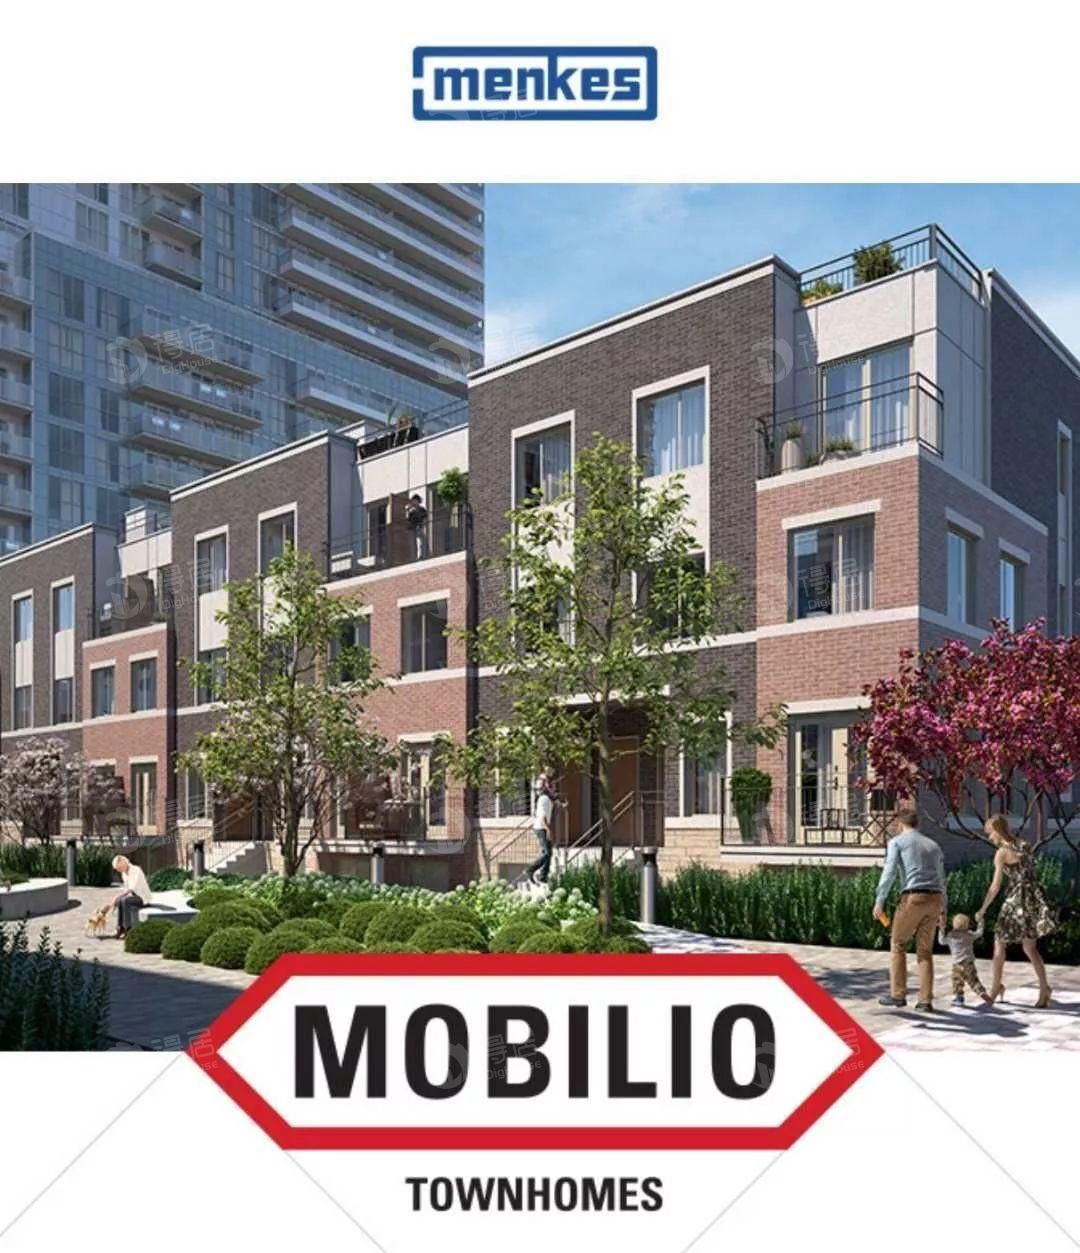 Mobilio Stacked Townhomes尾盘楼花 - 得居海外房产